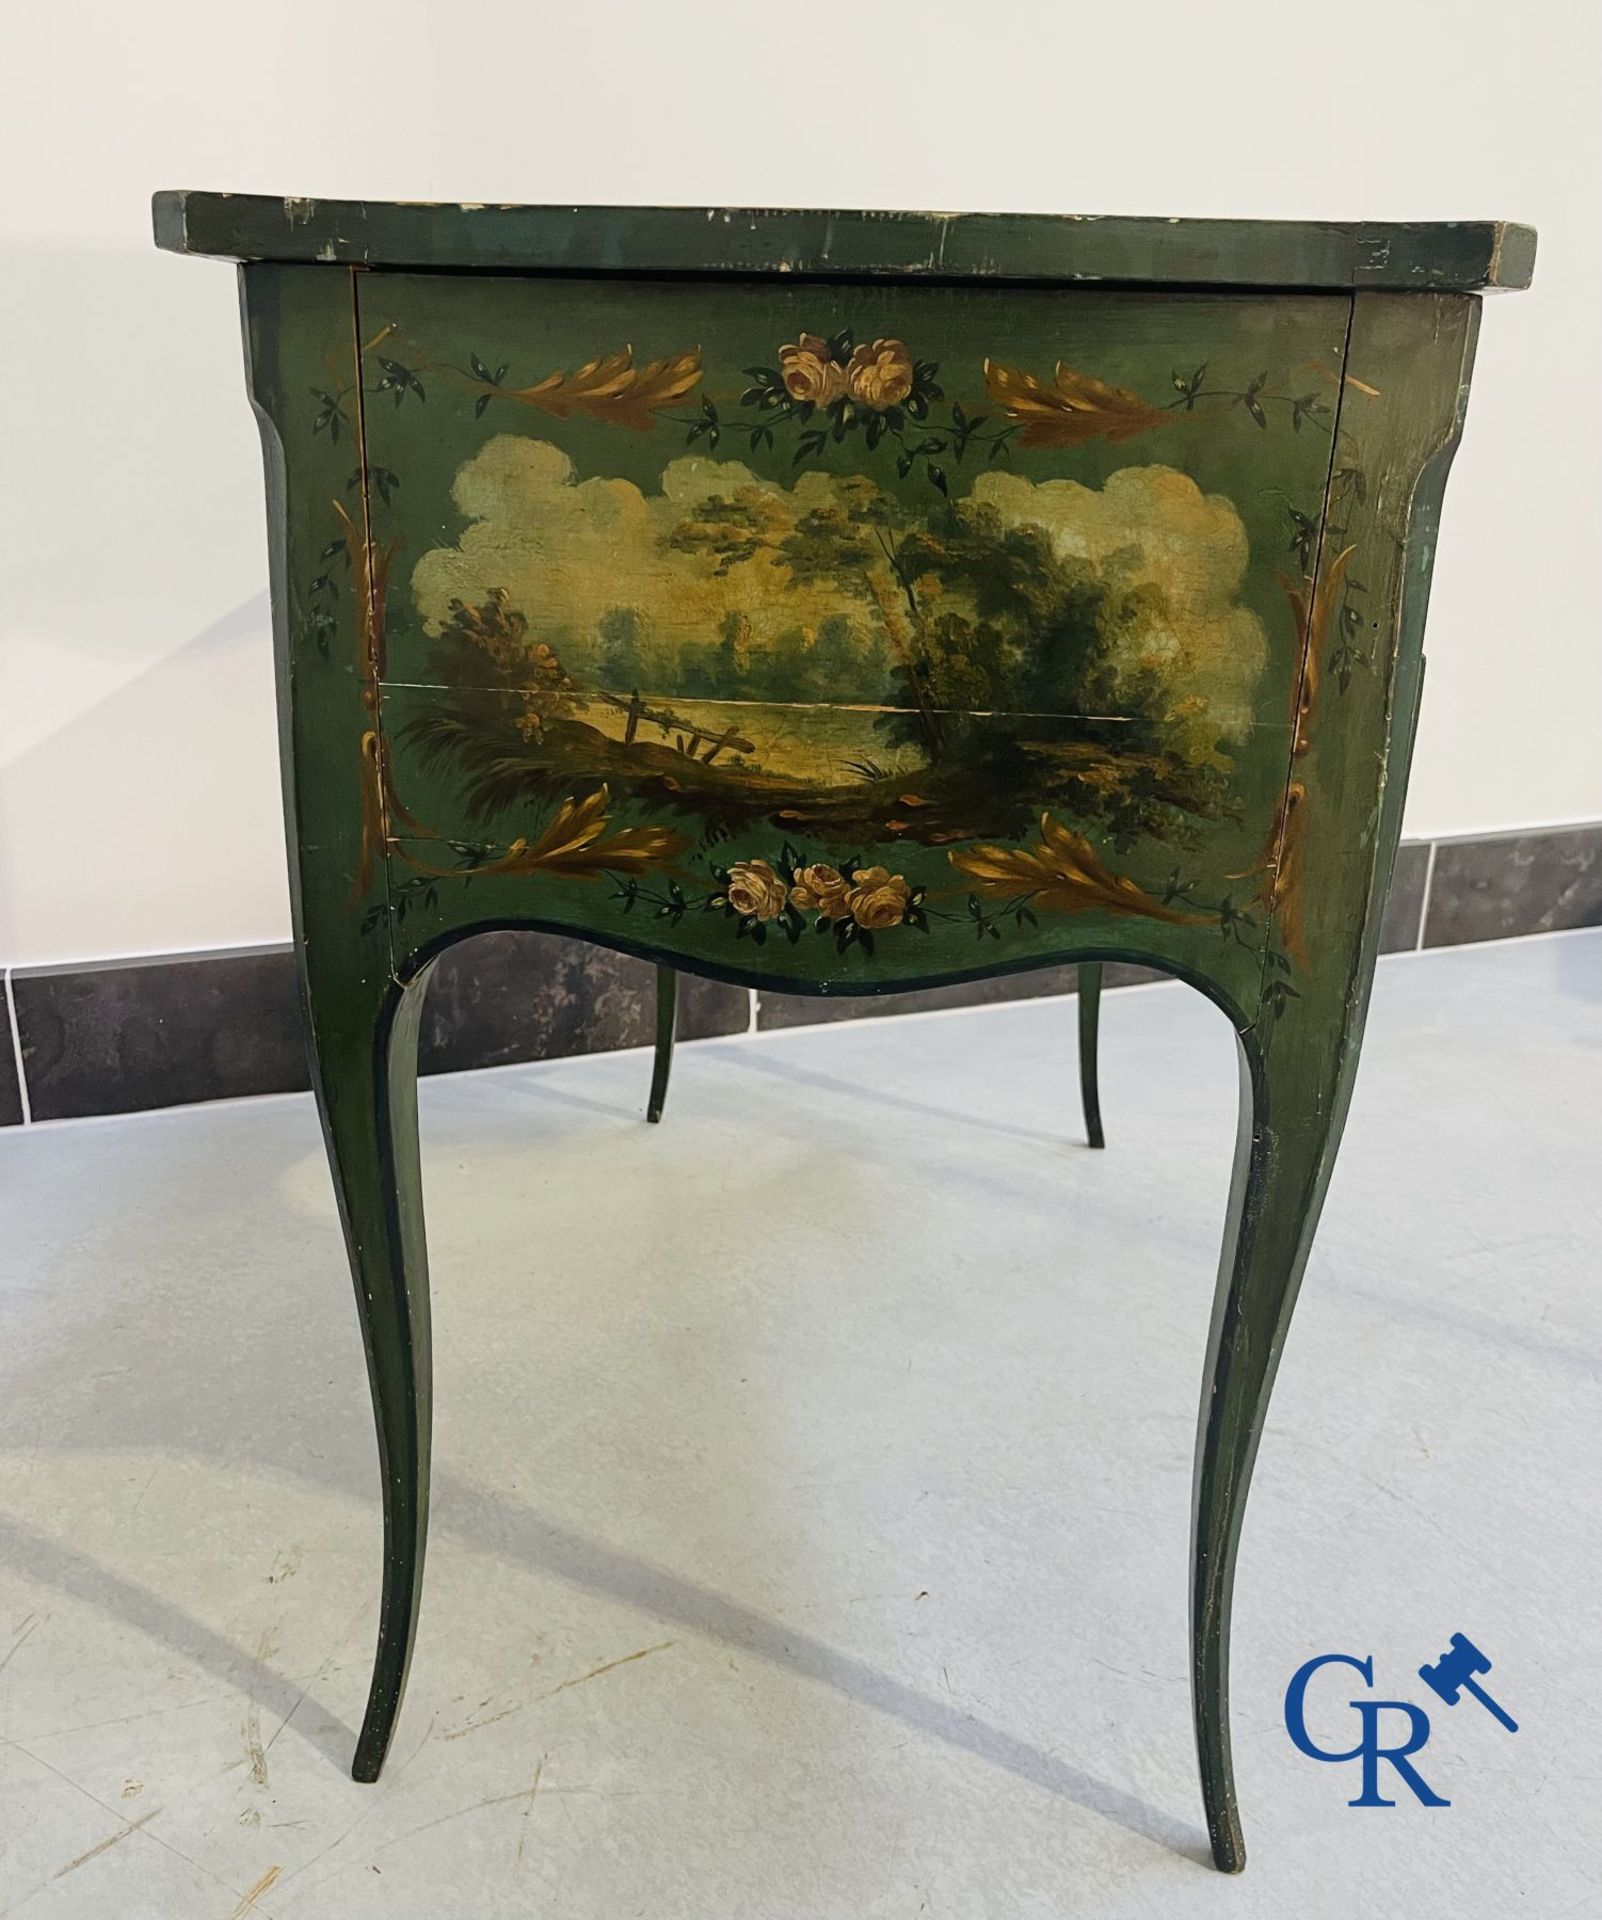 Ladies dressing table with gallant paintings, and a lacquered armchair transitional period Louis XV  - Image 12 of 17